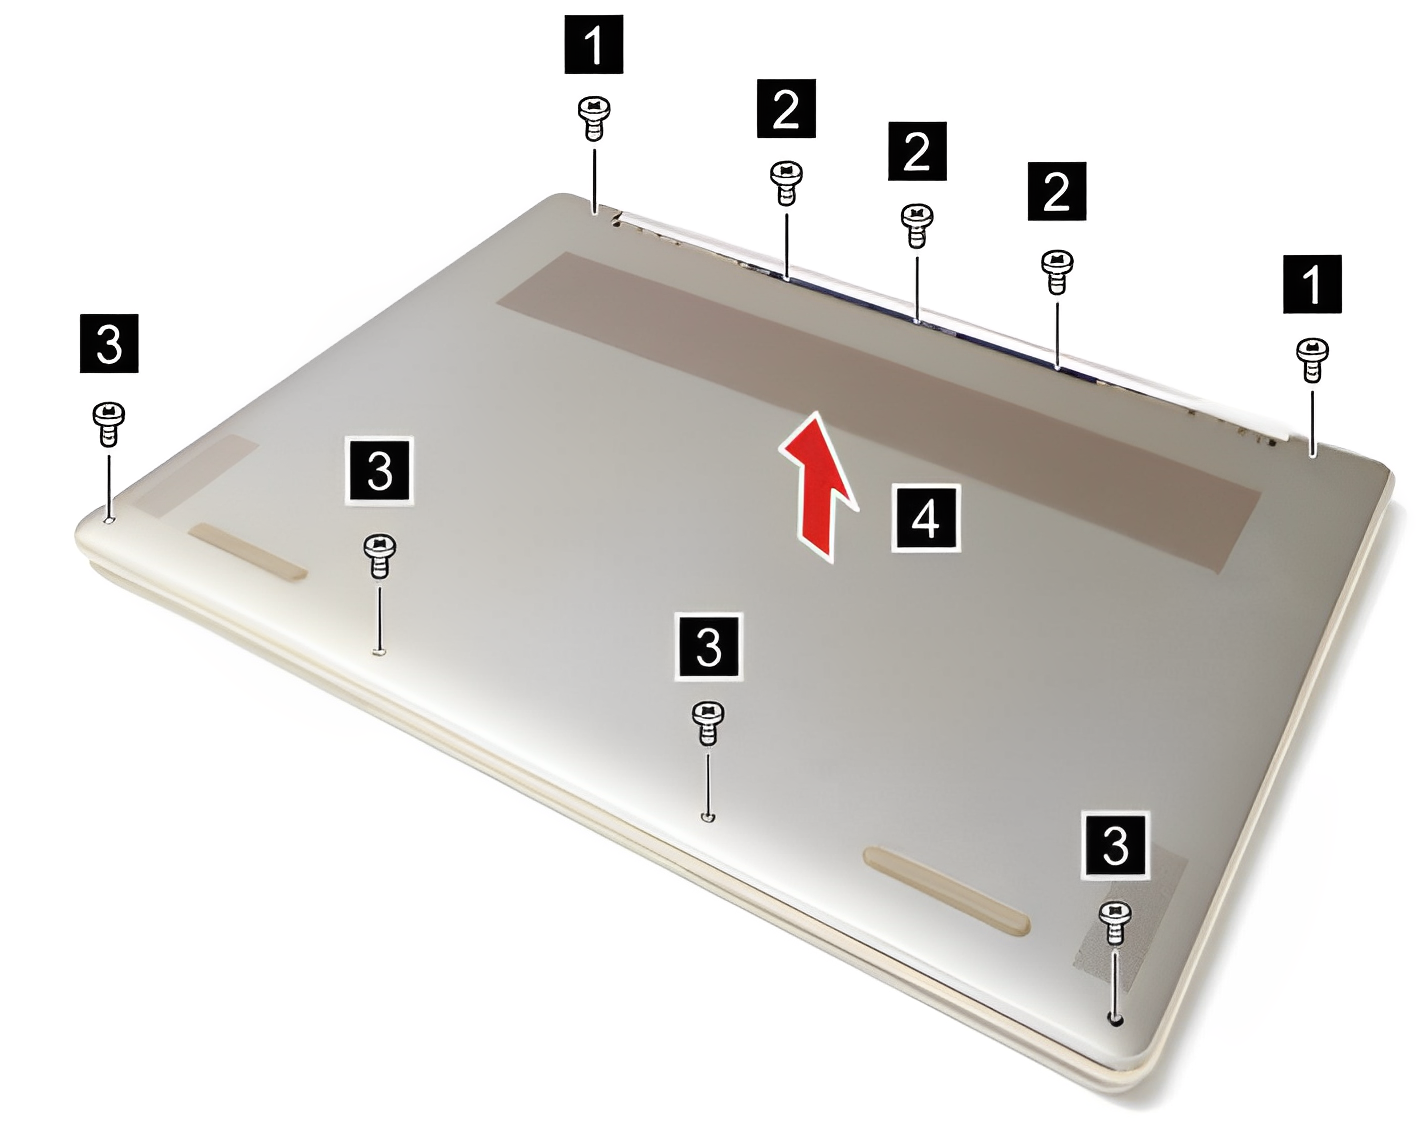 Illustration showing how to remove the screws and base cover from the Lenovo Yoga 9i